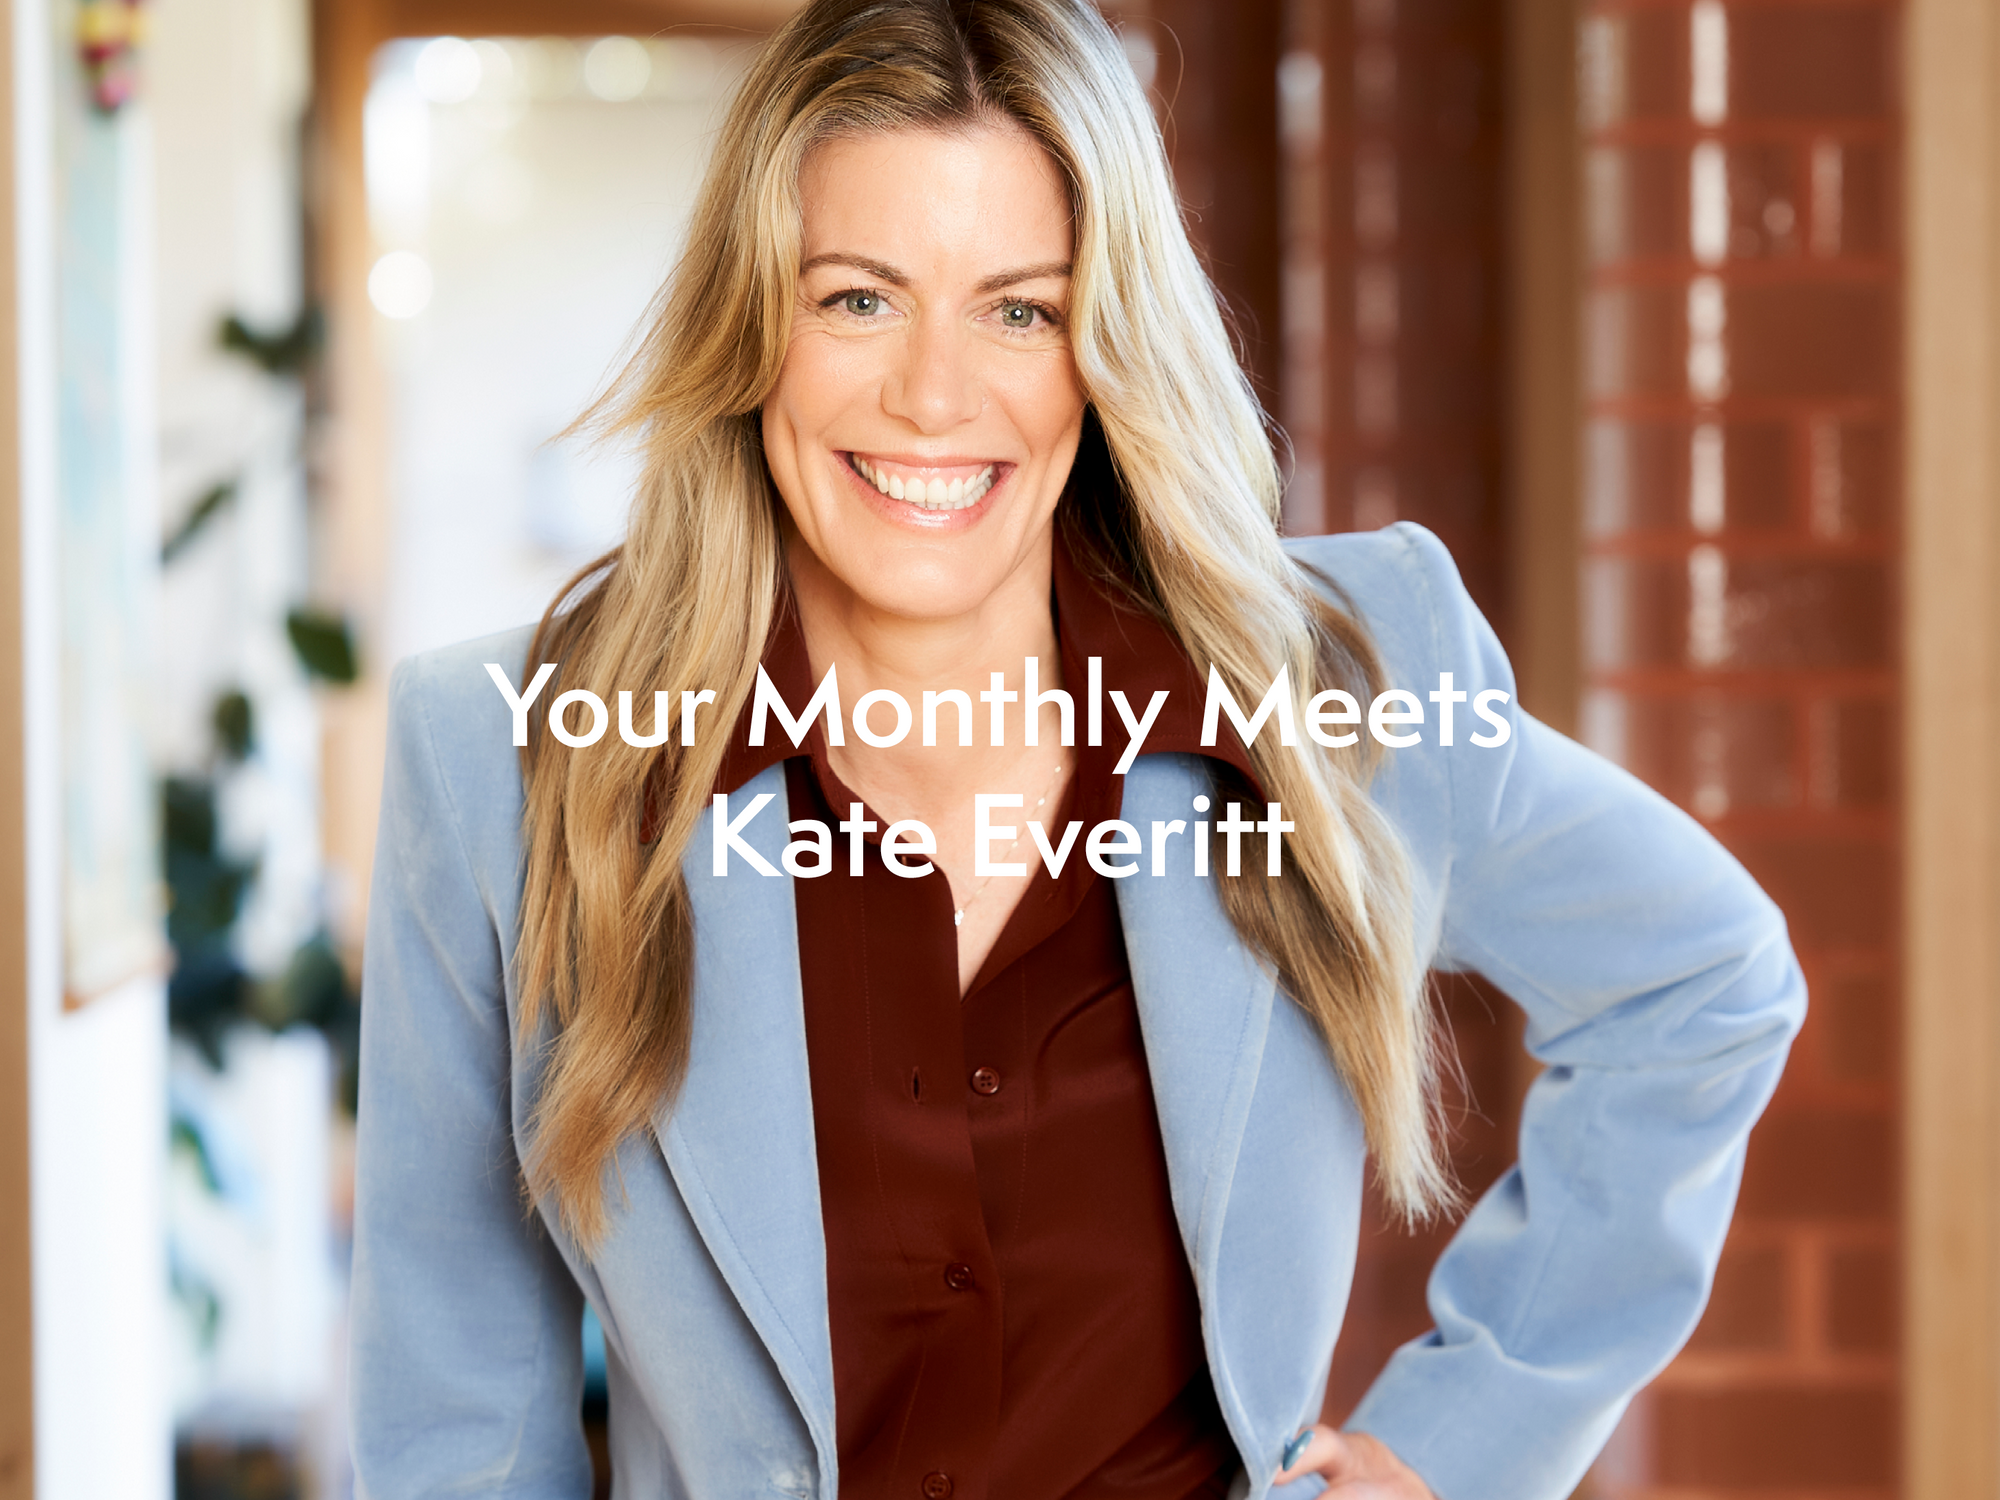 Your Monthly Meets - Kate Everitt